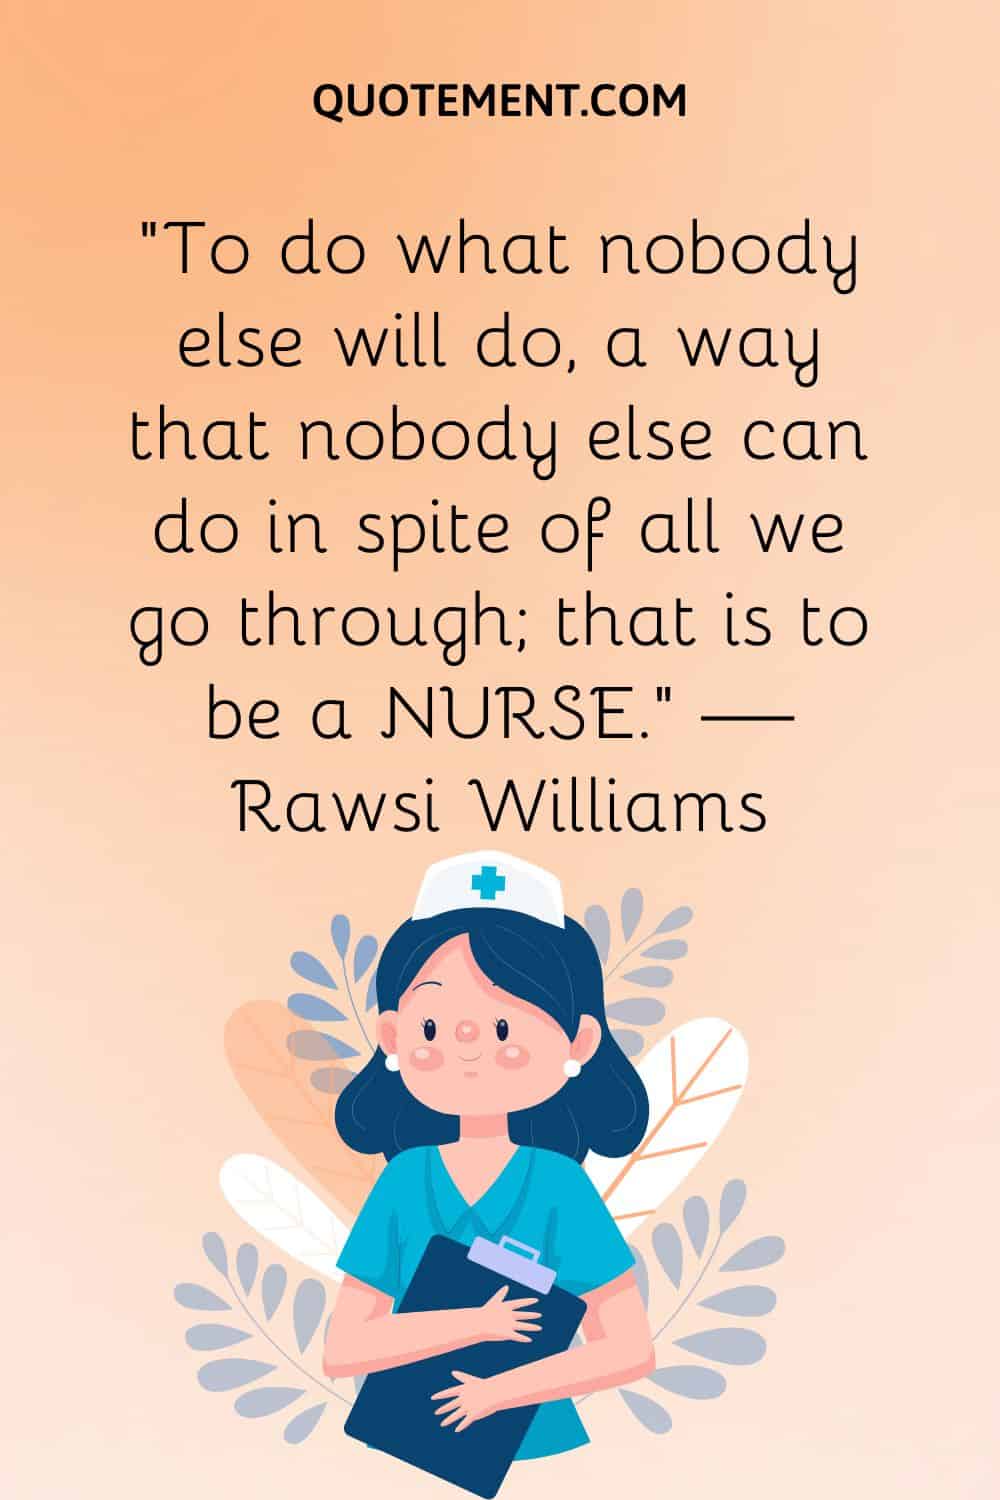 “To do what nobody else will do, a way that nobody else can do in spite of all we go through; that is to be a NURSE.” — Rawsi Williams